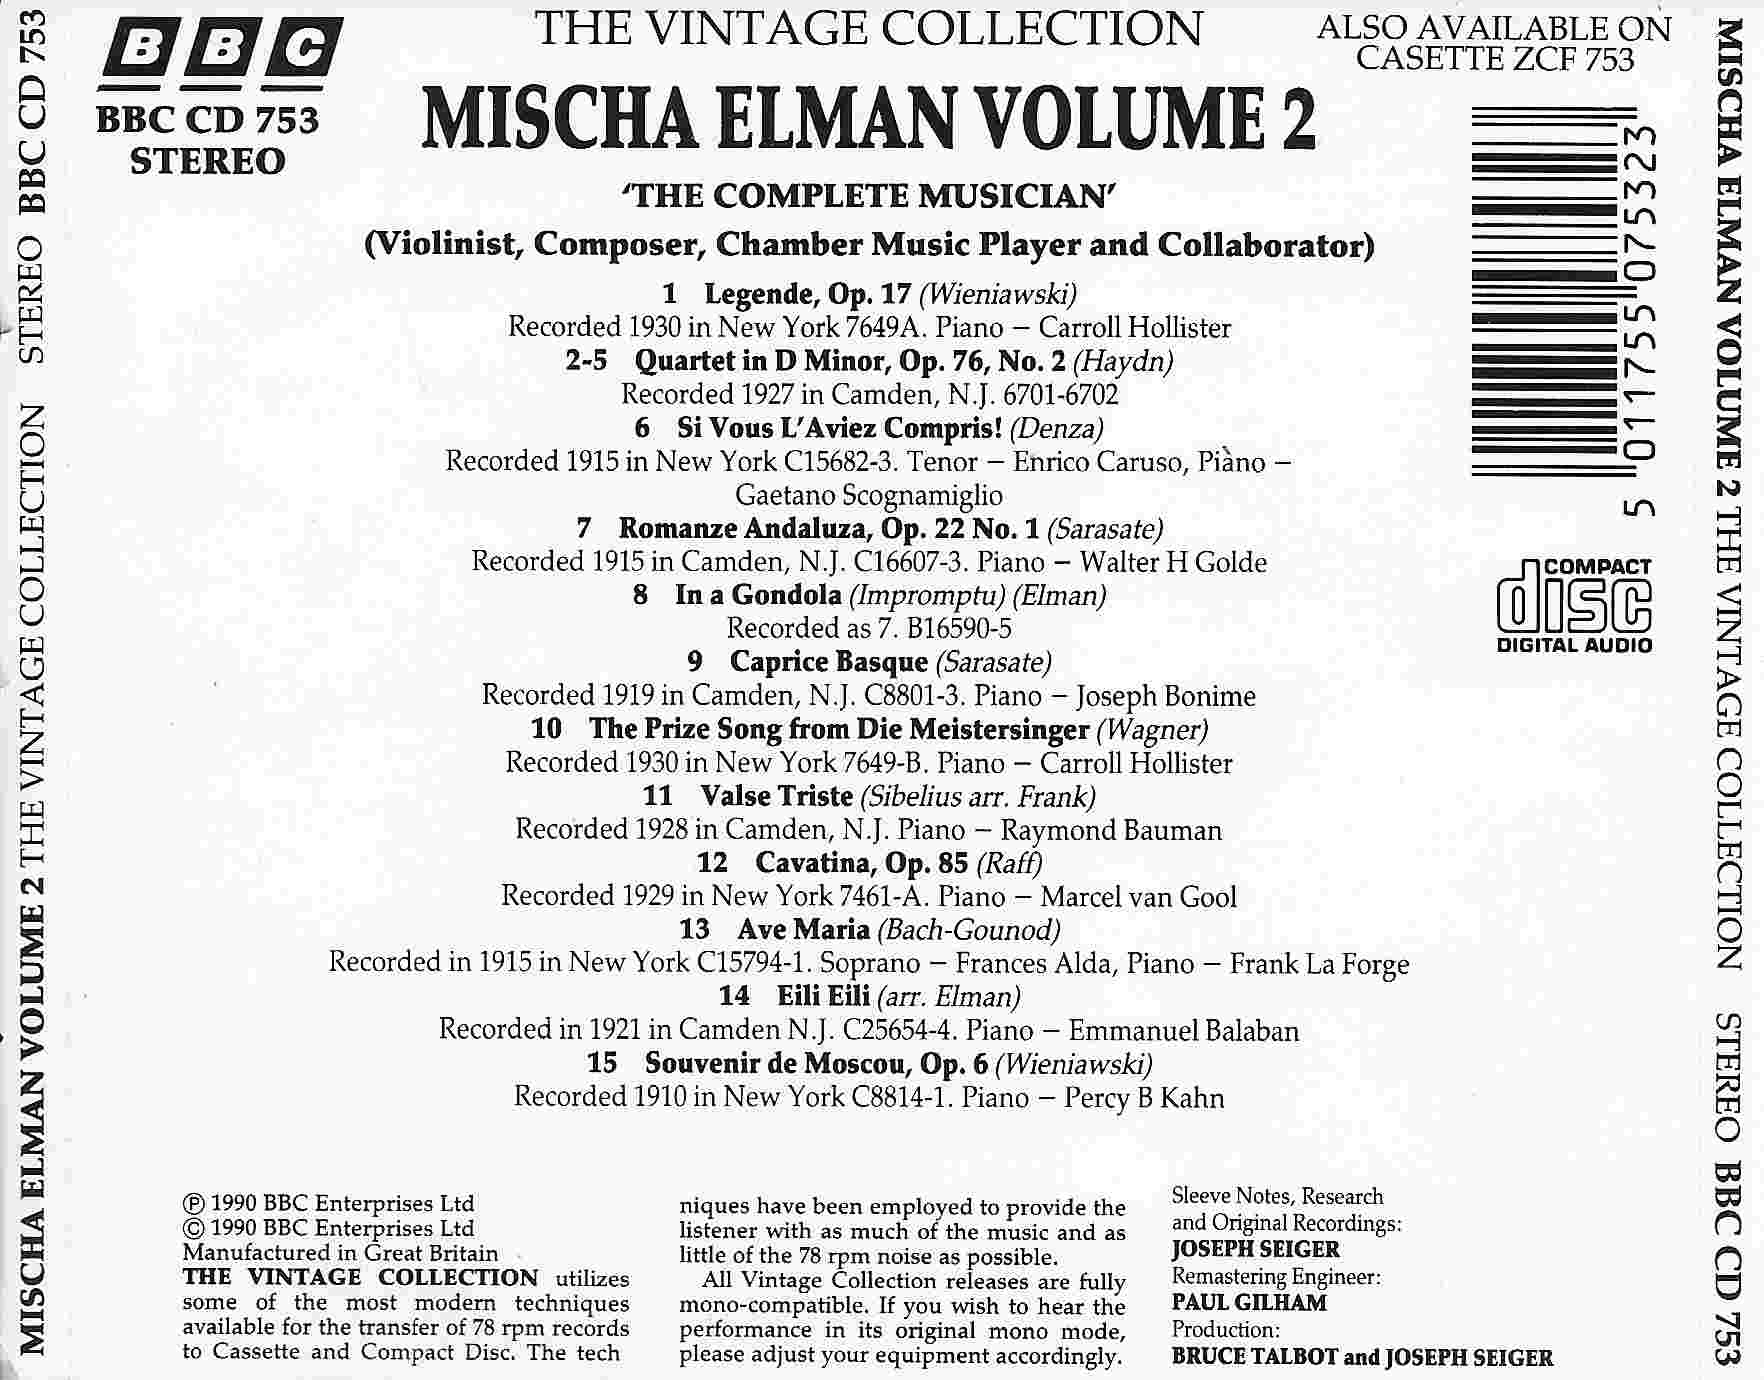 Picture of BBCCD753 The vintage collection - Mischa Elman 2 by artist Mischa Elman from the BBC records and Tapes library